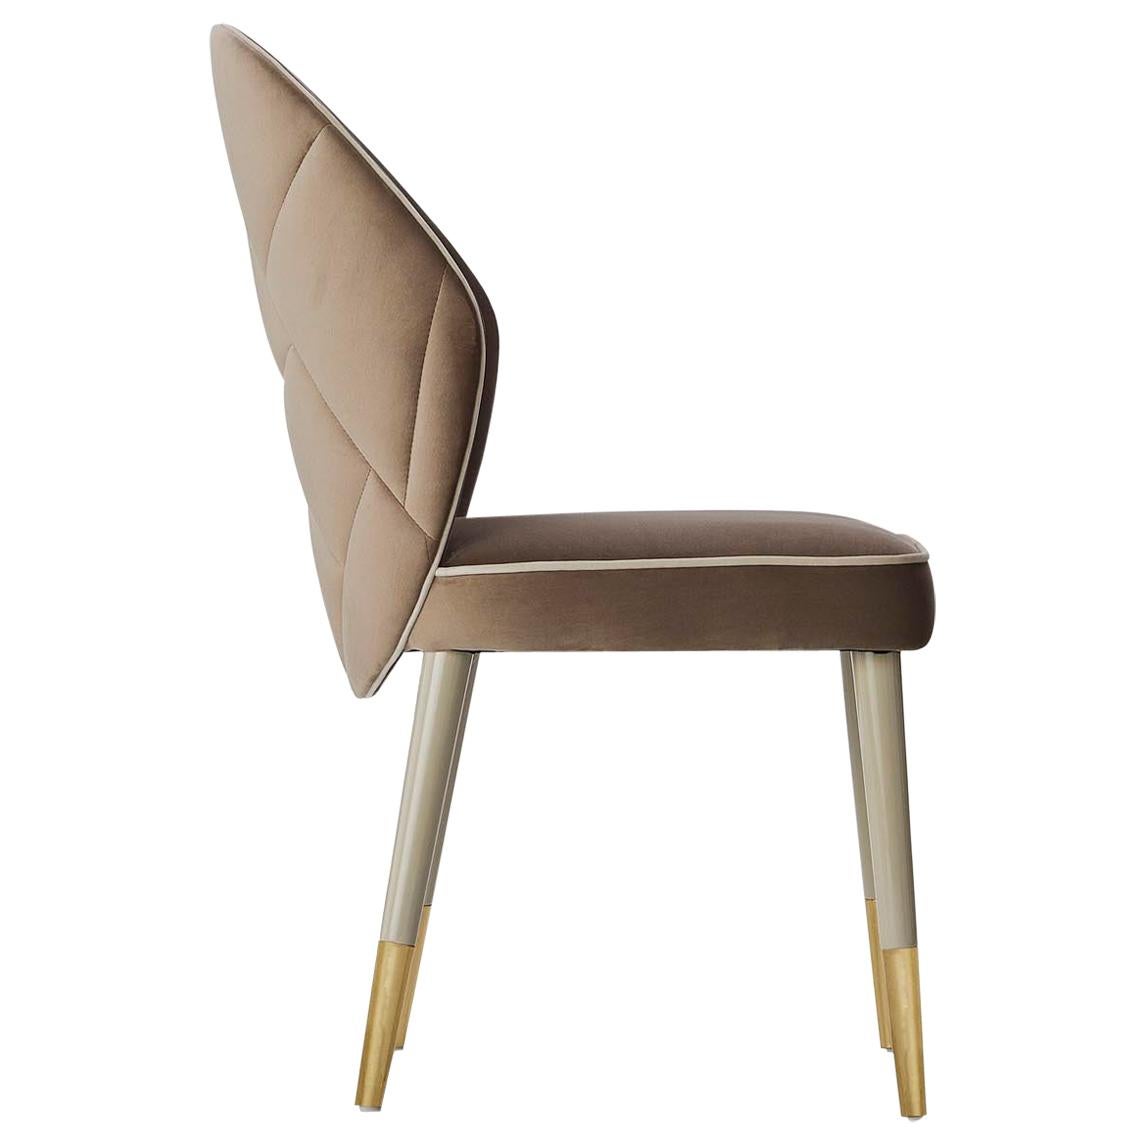 Beyond its undeniable beauty, Sophia dining chair is an elegant and comfortable piece, with sophisticated details on its back.
Outlined by beautiful piping detail, this chair set comes upholstered with project 4 Taupe (Structure) and Confort 2